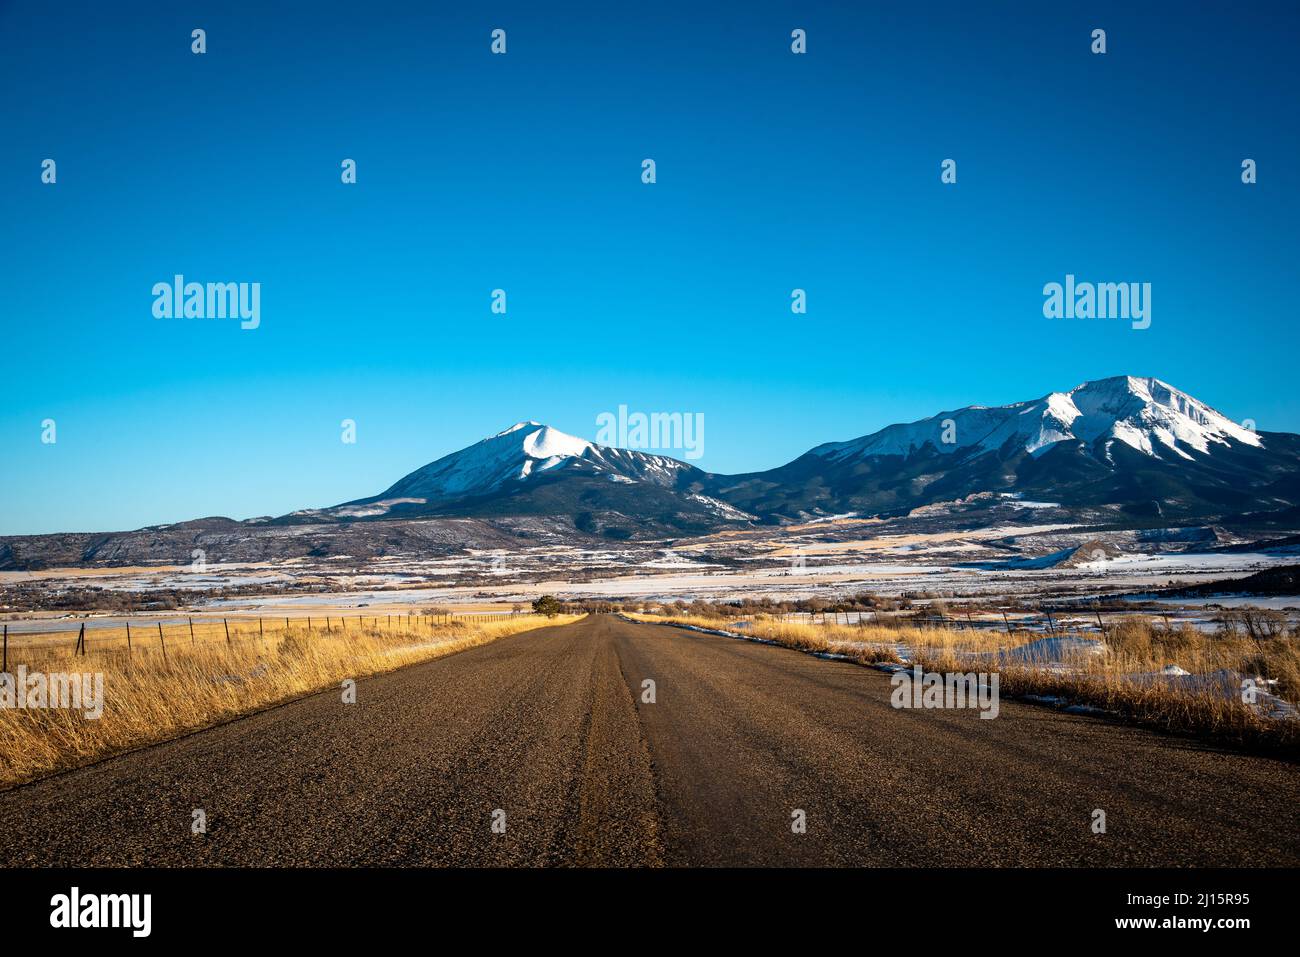 Scenic road view in Southern Colorado heading to Great Sand Dunes National Park Stock Photo